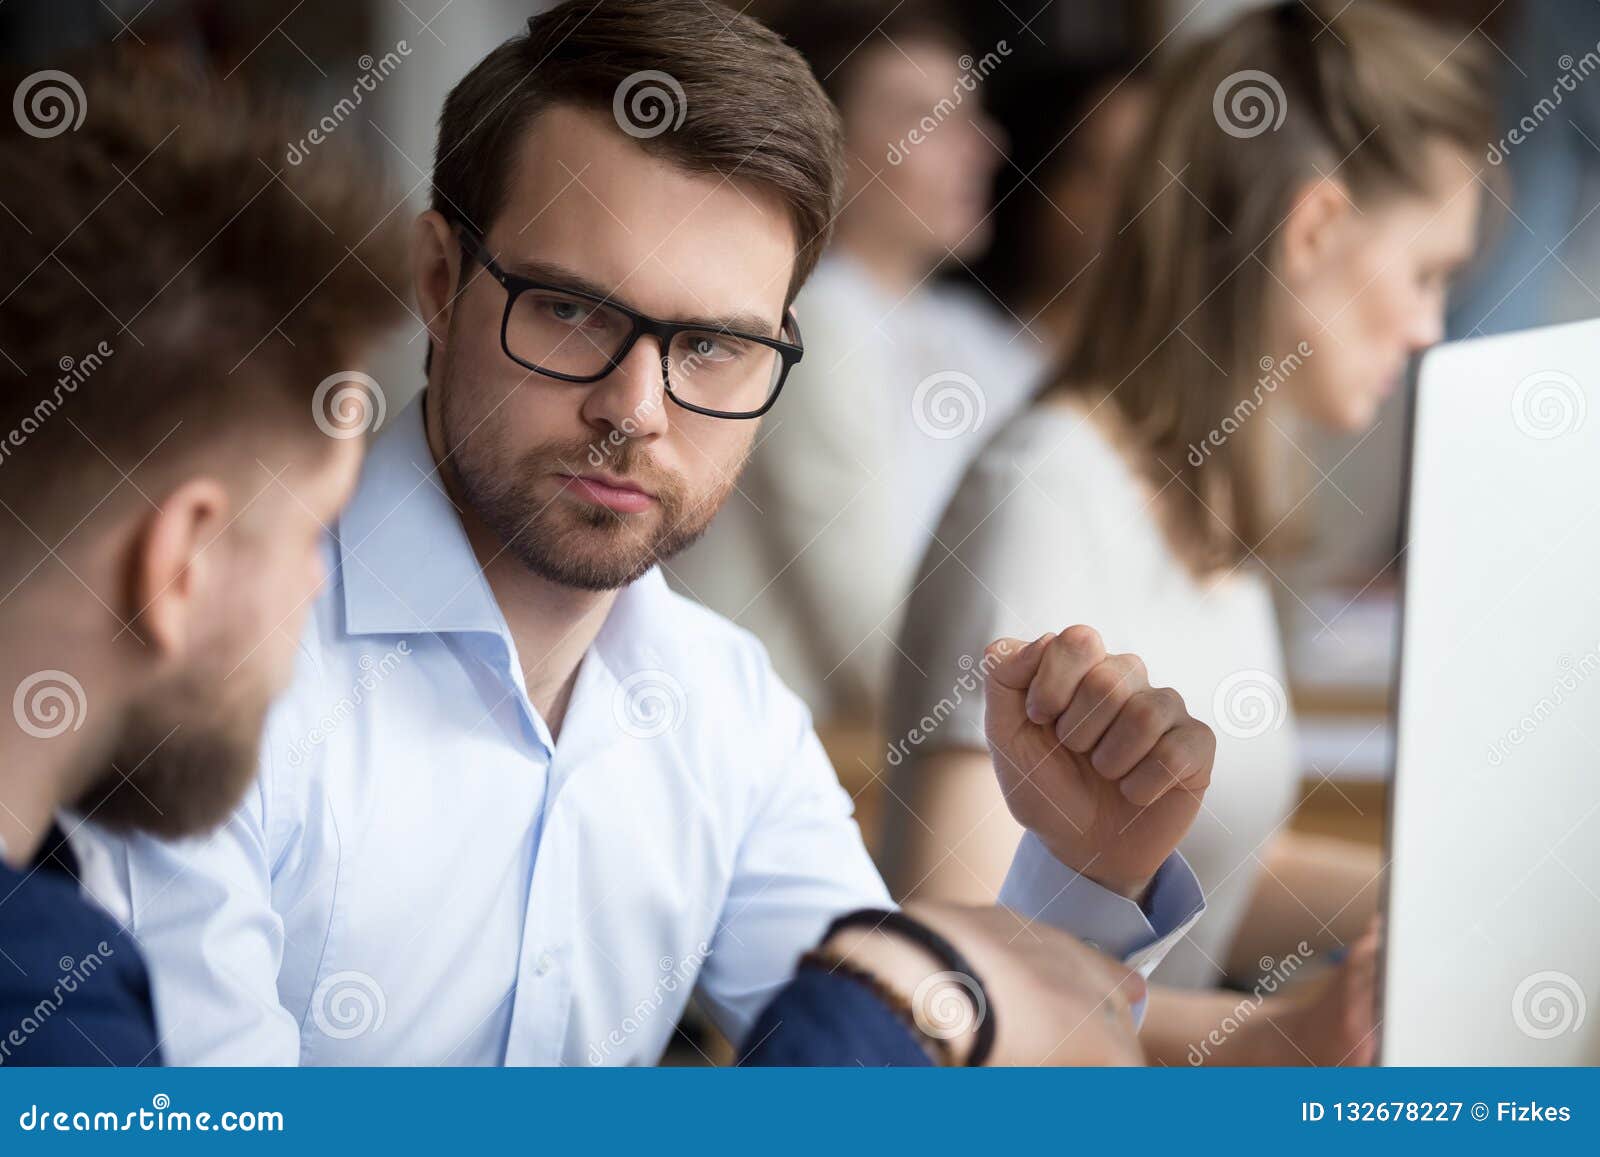 serious focused male employee listening to colleague